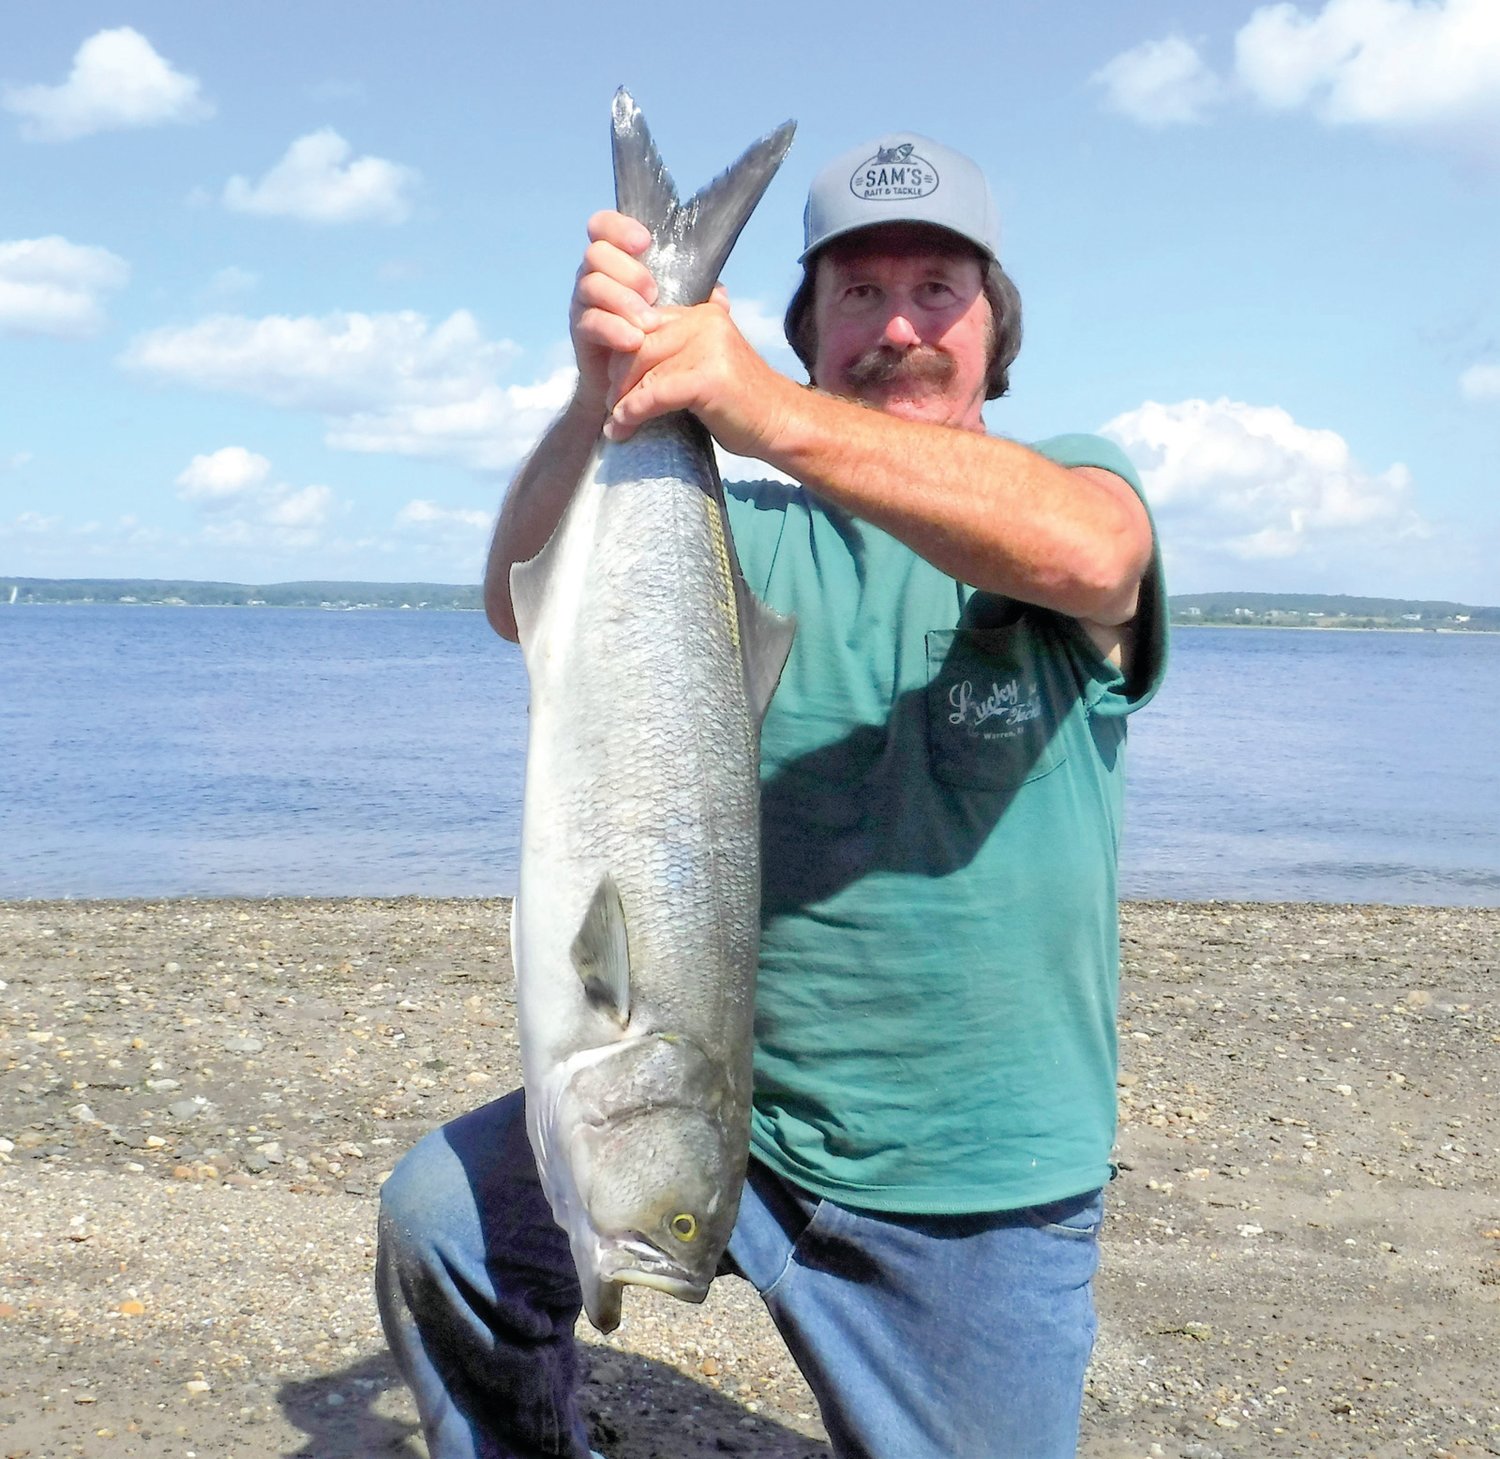 BIG BLUE: John Migliori of Aquidneck Island with the 34 inch, 13 pound, 2 once bluefish he caught on an Atlantic menhaden chuck last week.